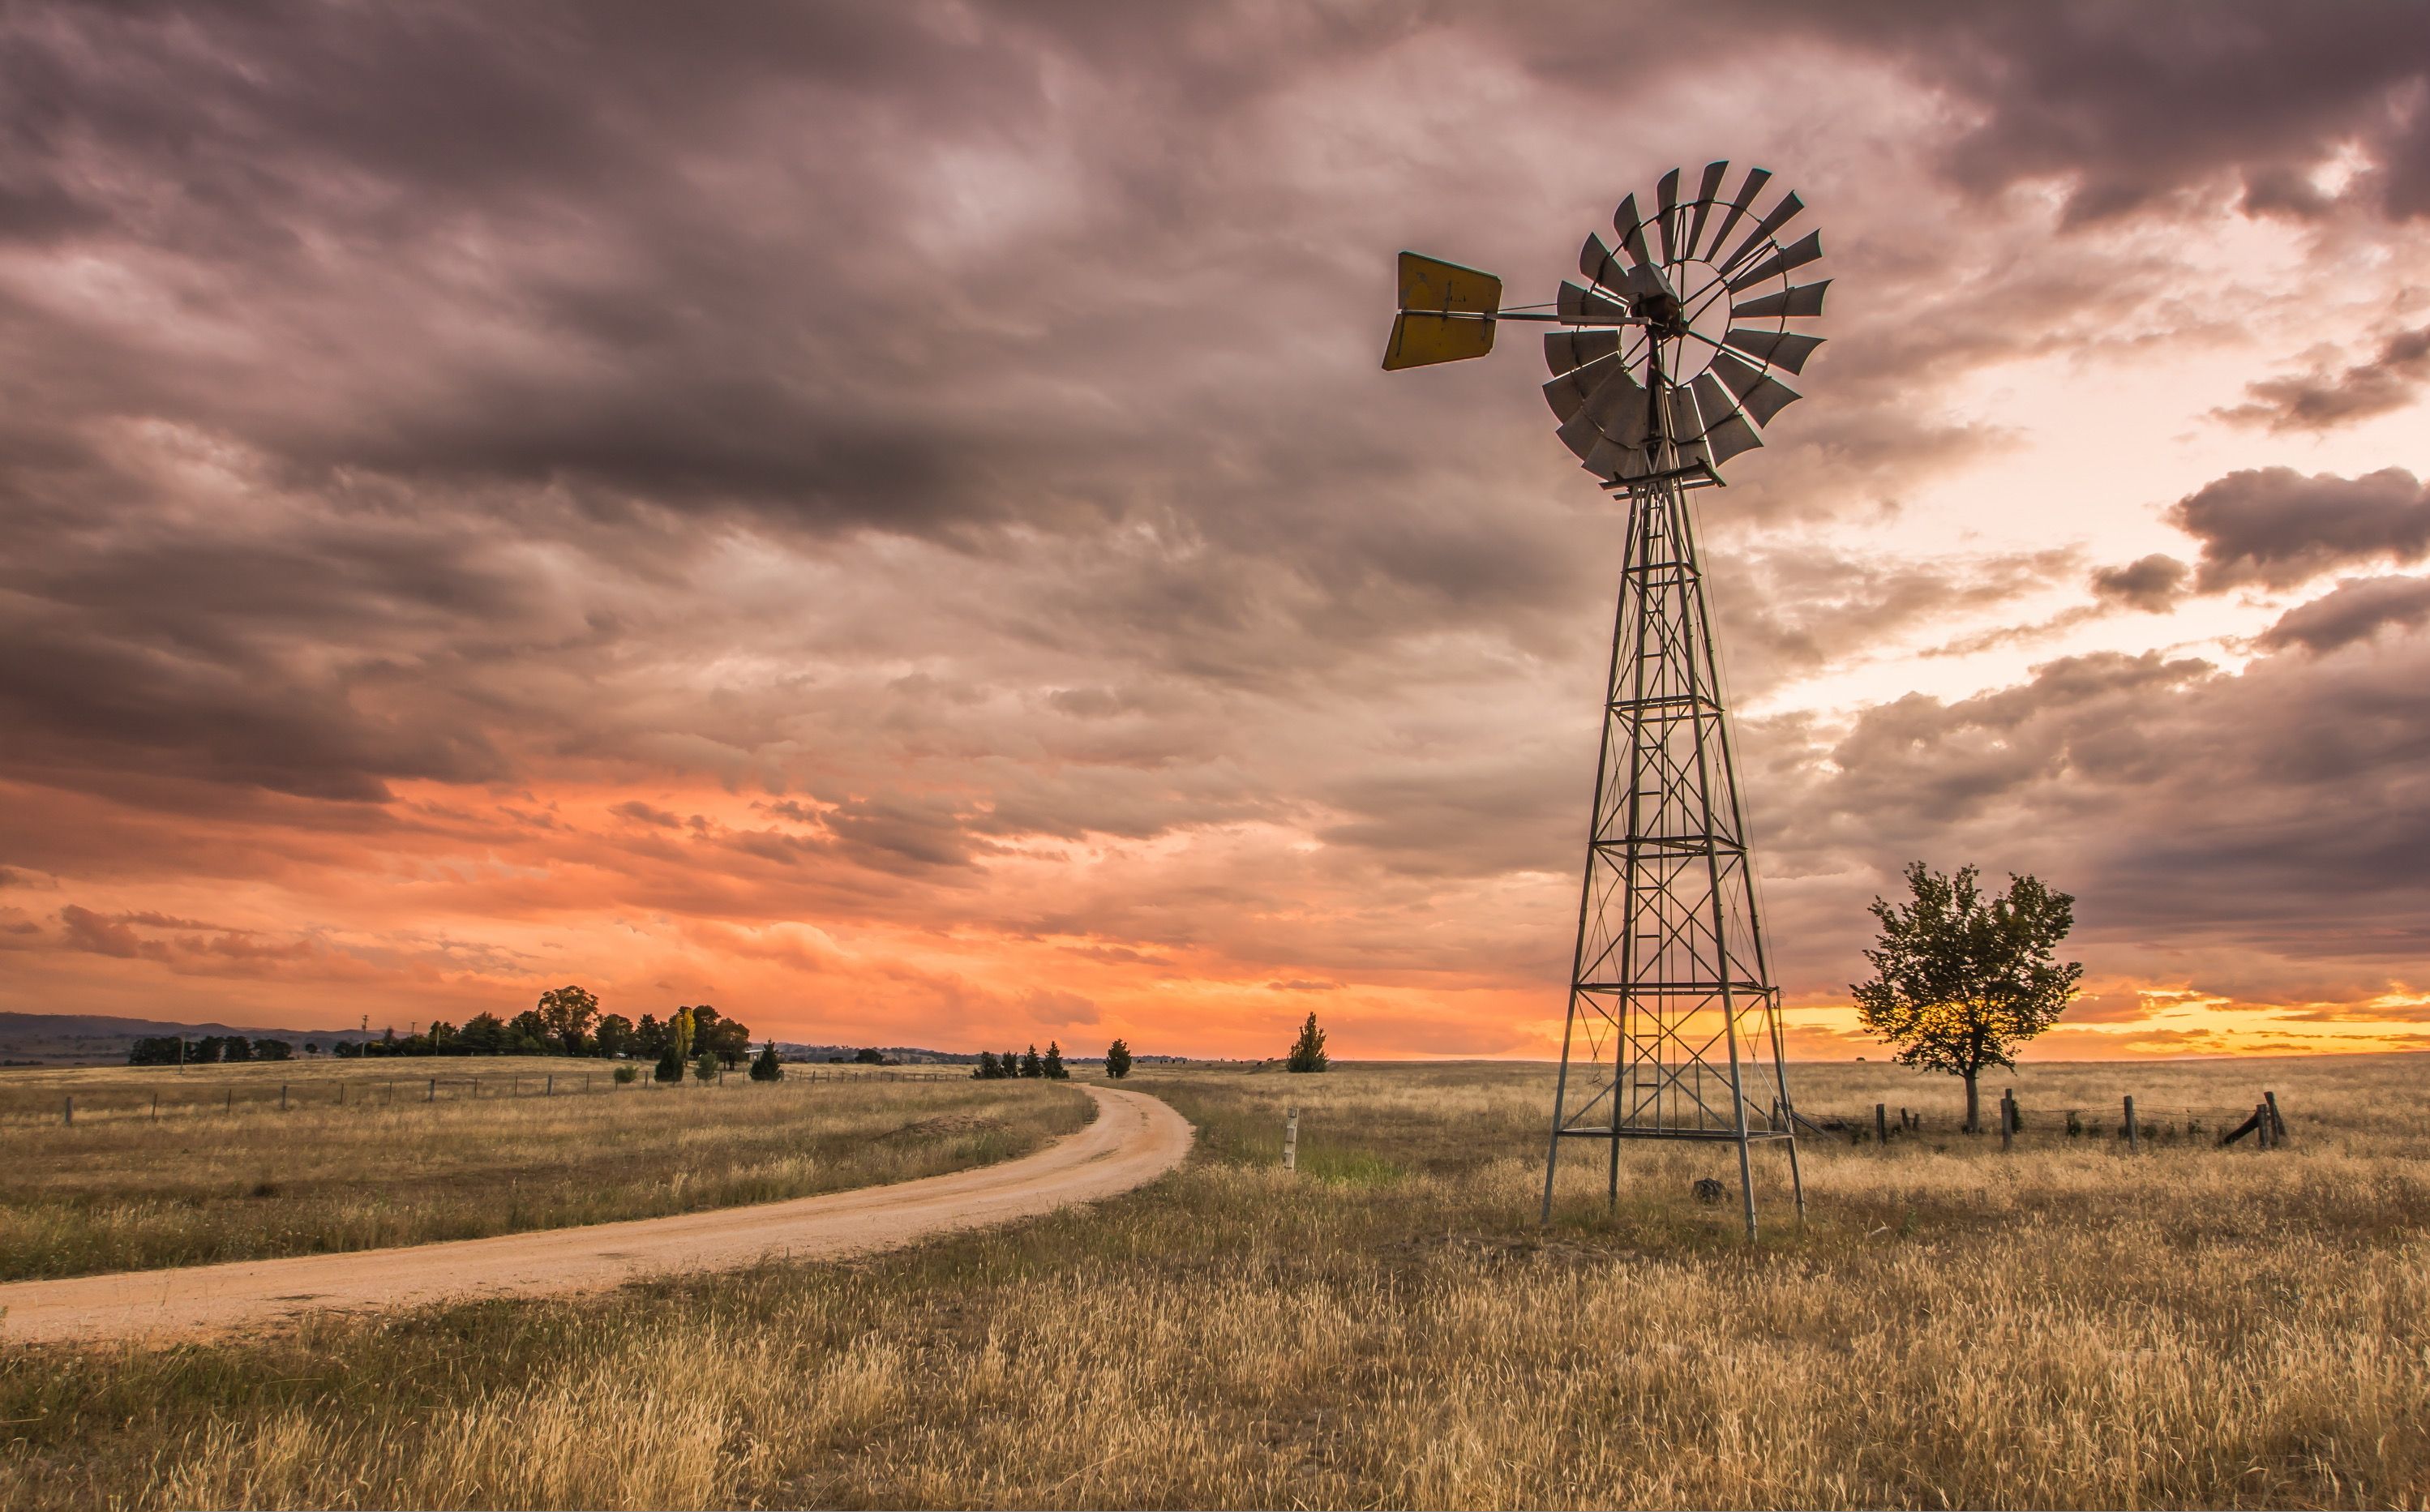 Windmill and country road (Brewongle, New South Wales, Australia) [photographer unknown]